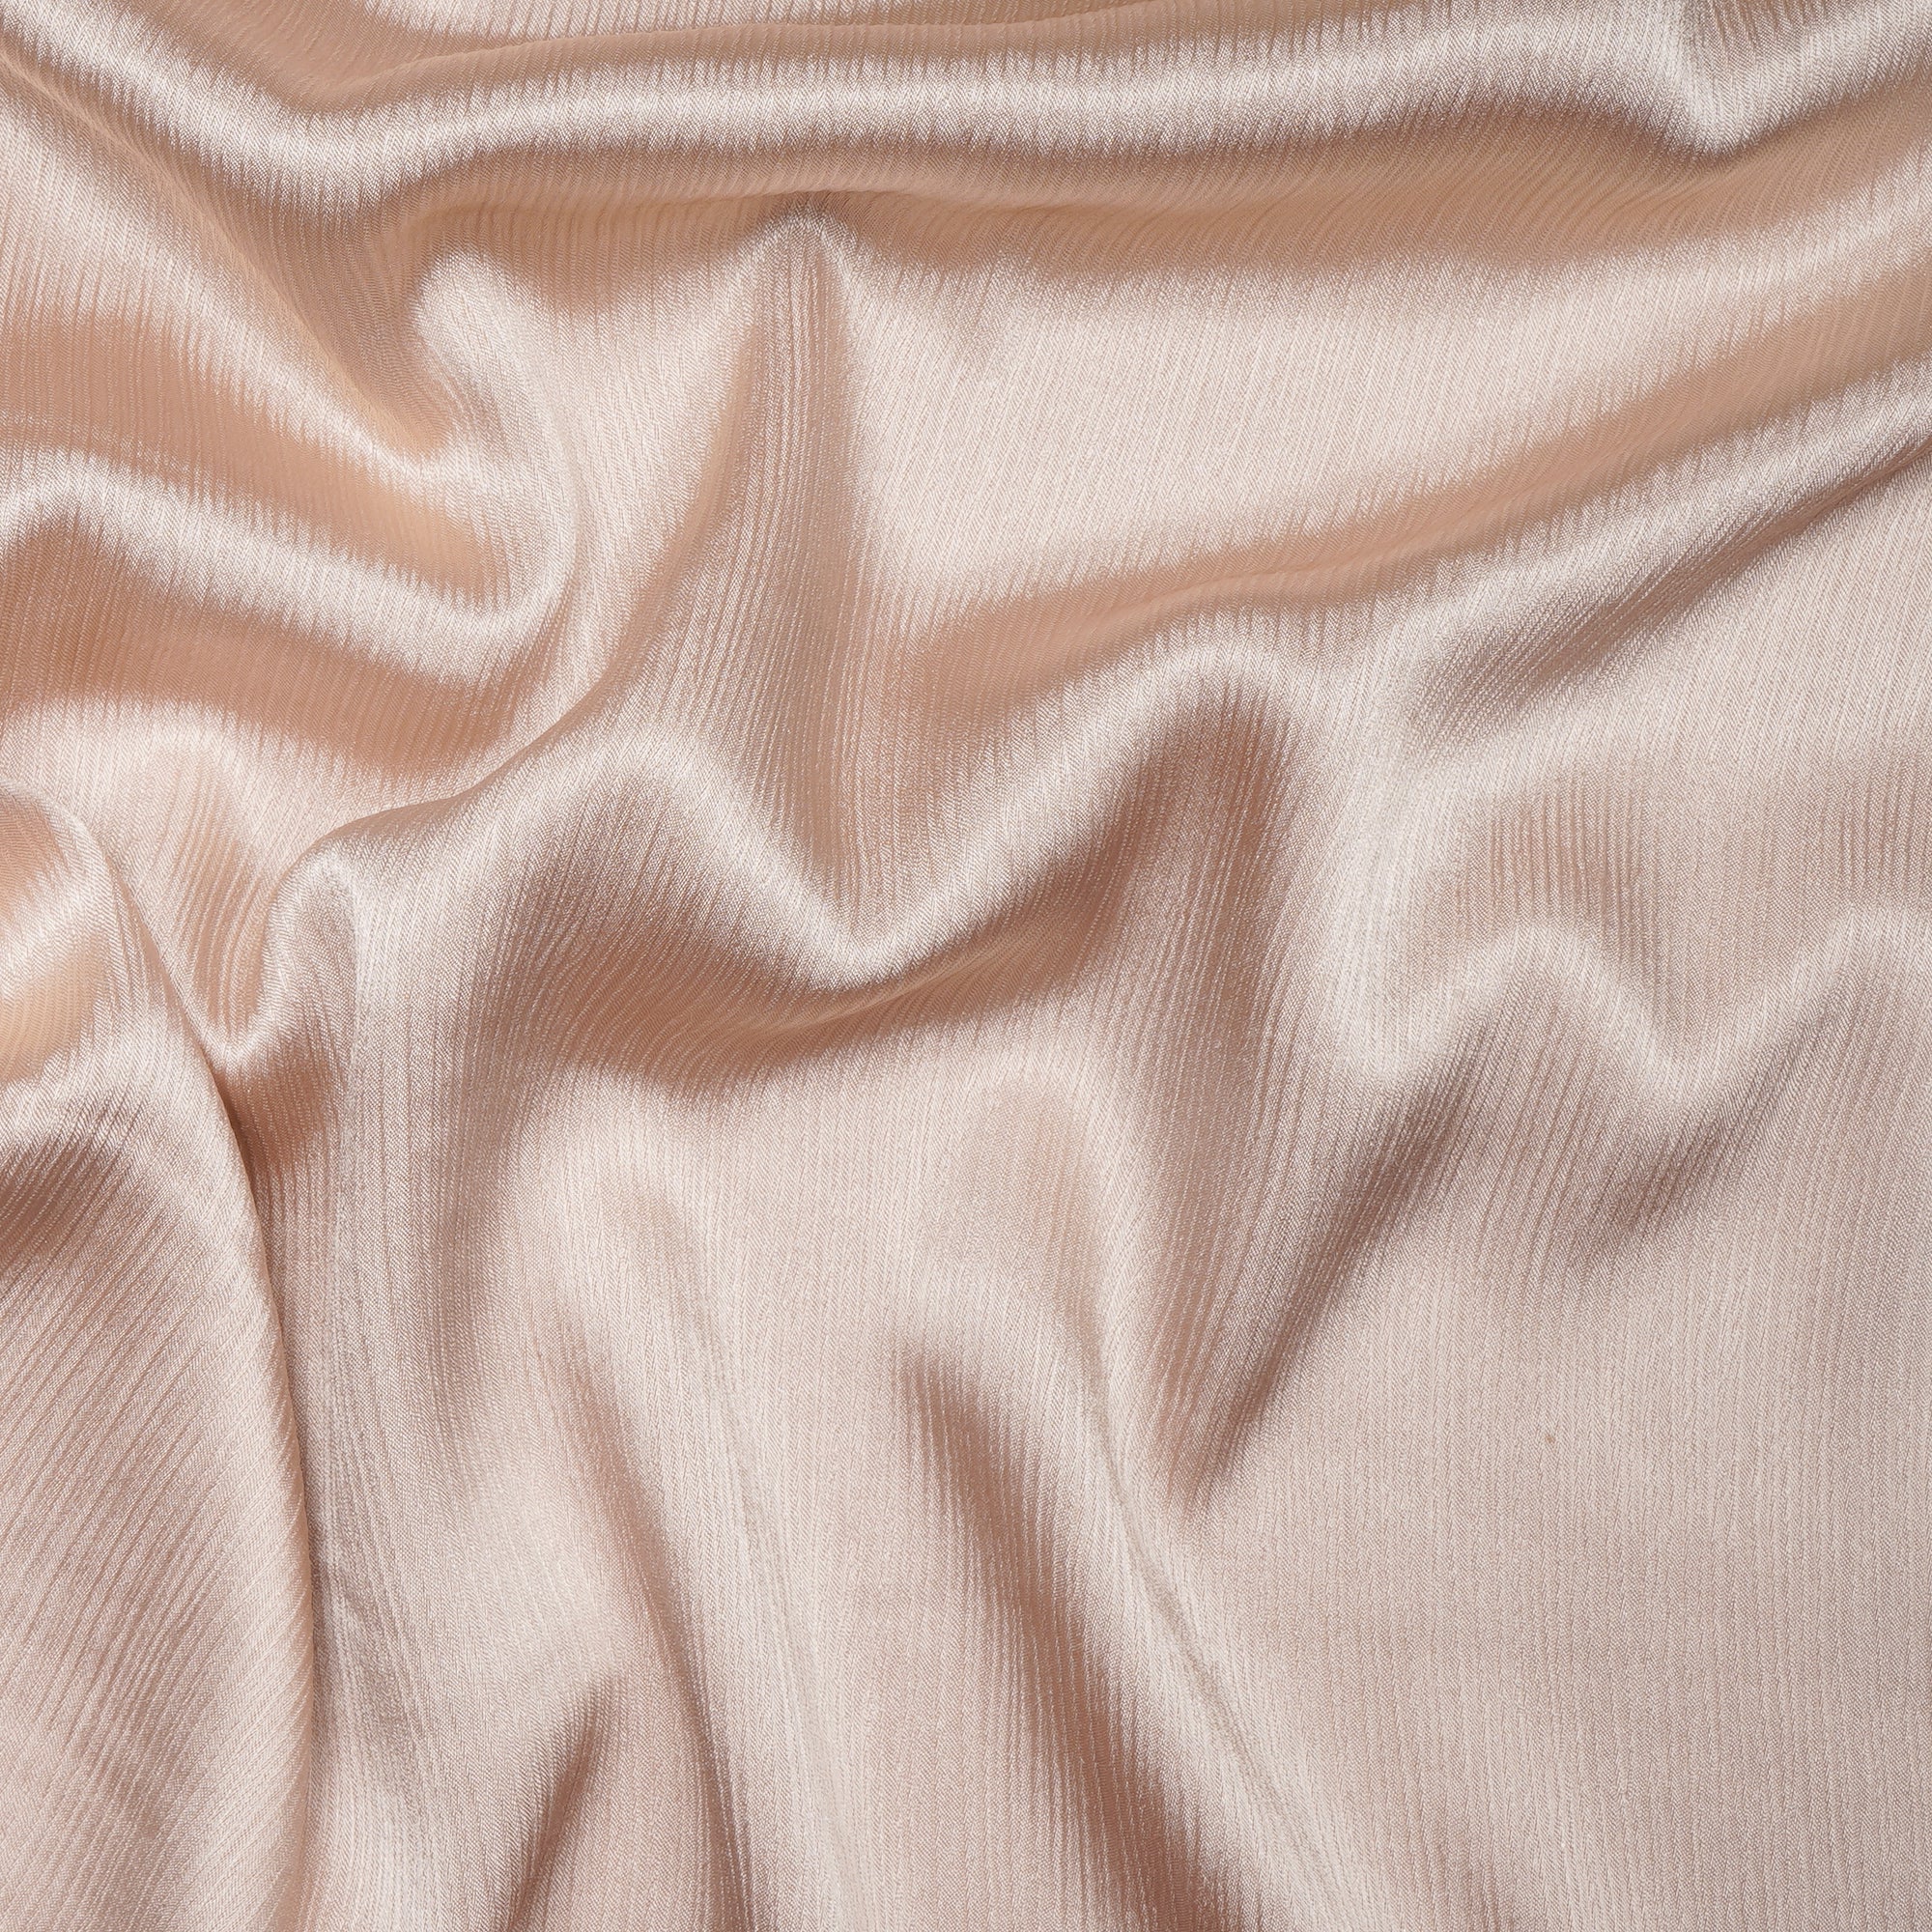 Beige Imported Crinkled Satin Fabric (60" Wide)